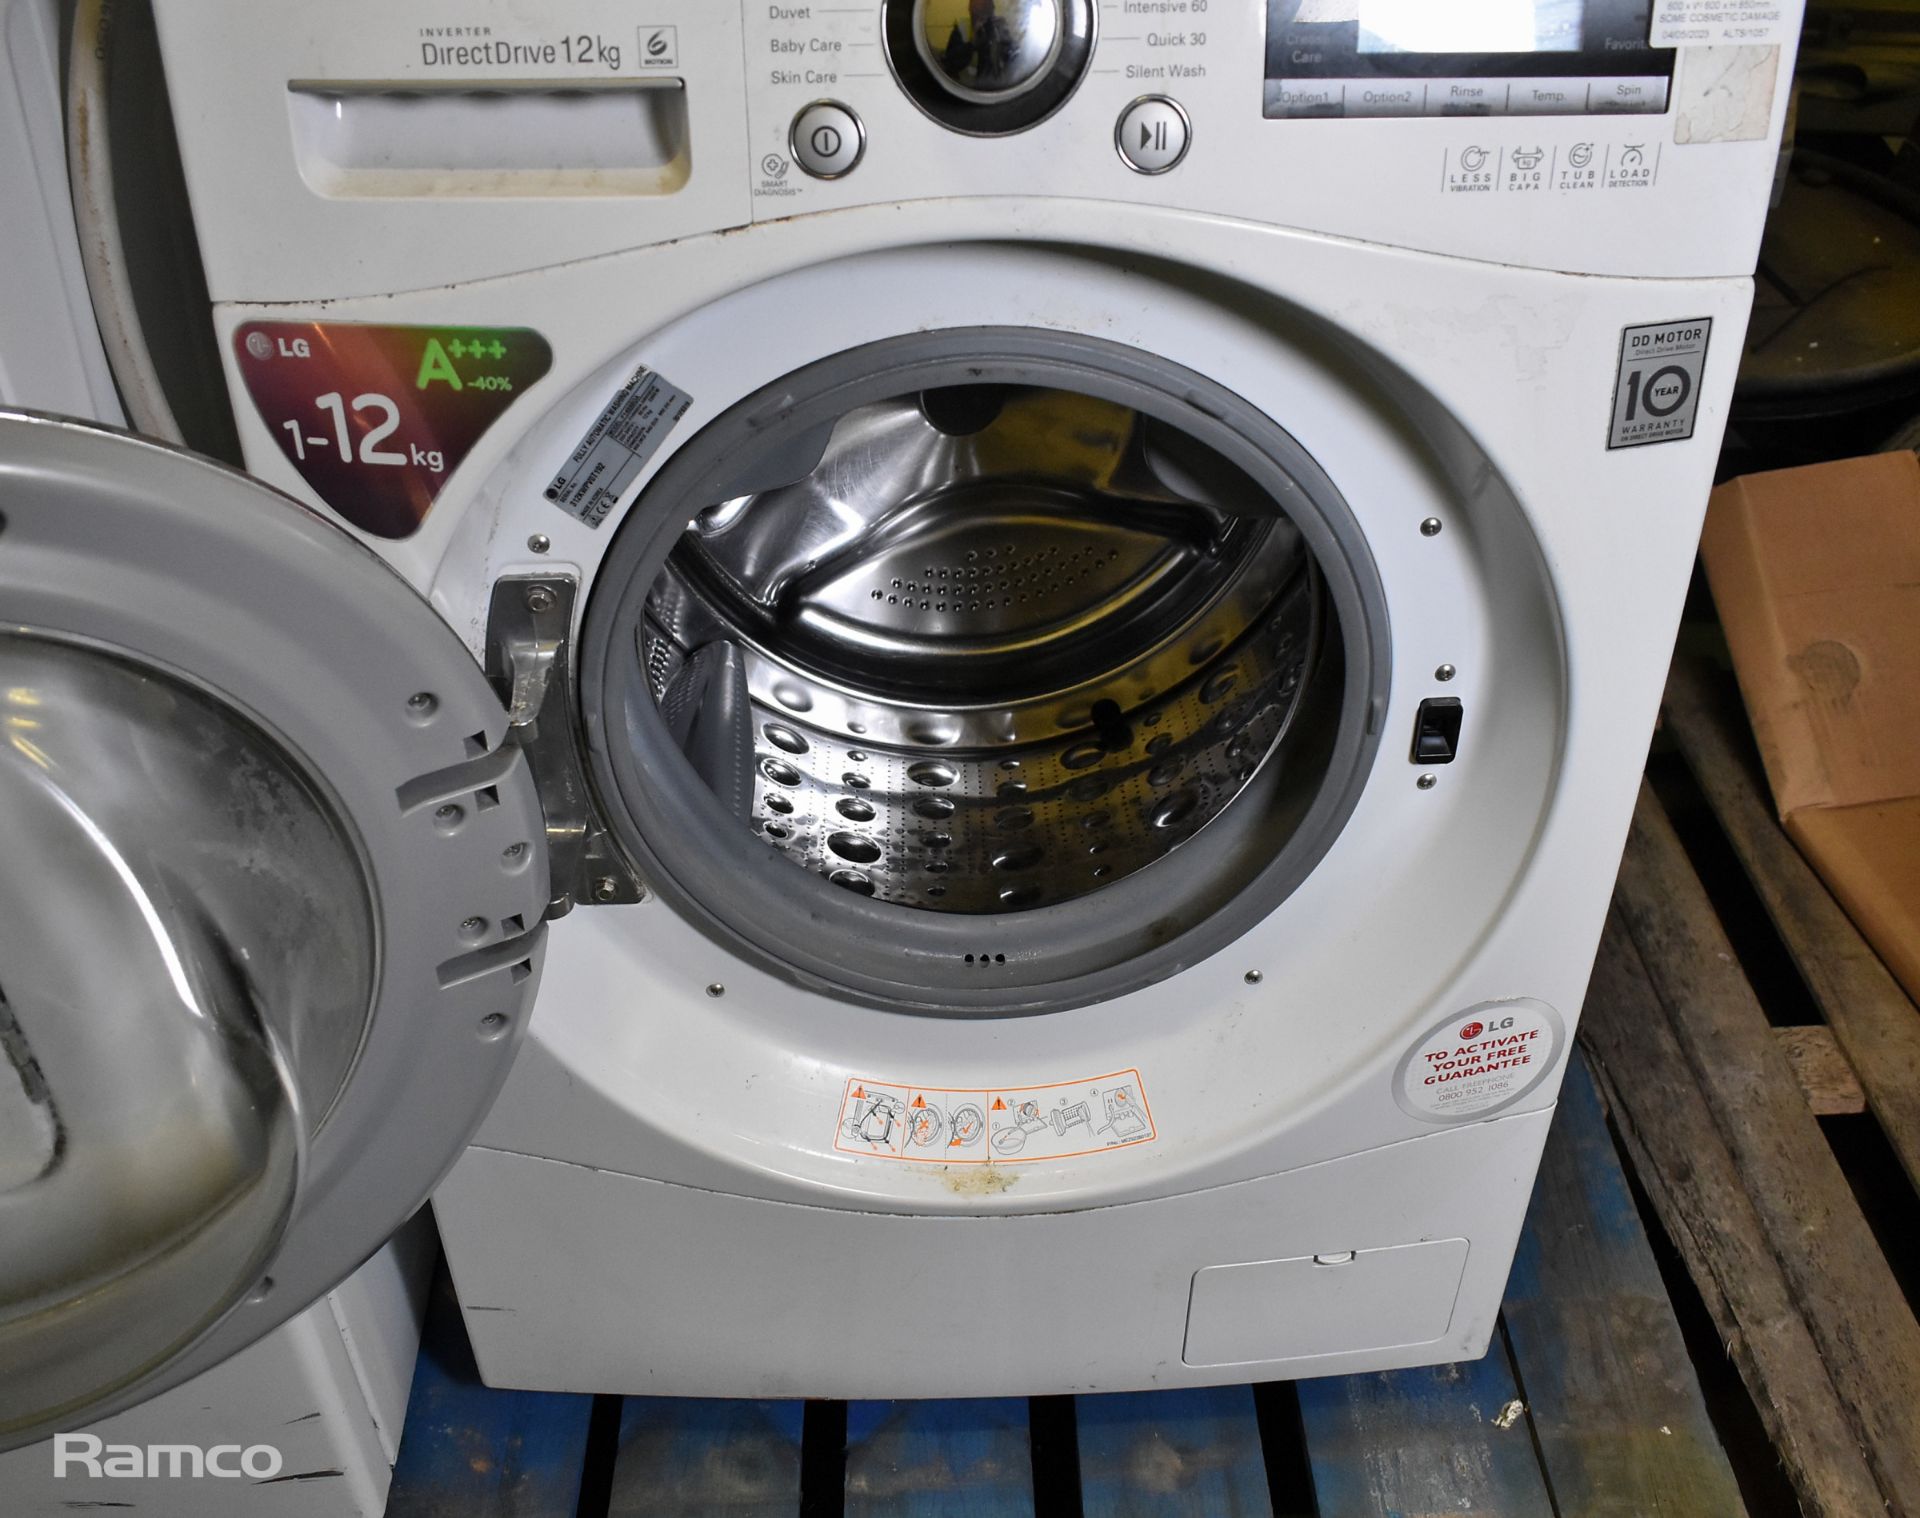 LG Truesteam 12kg direct drive washing machine - L 600 x W 600 x H 850mm - SOME COSMETIC DAMAGE - Image 3 of 4